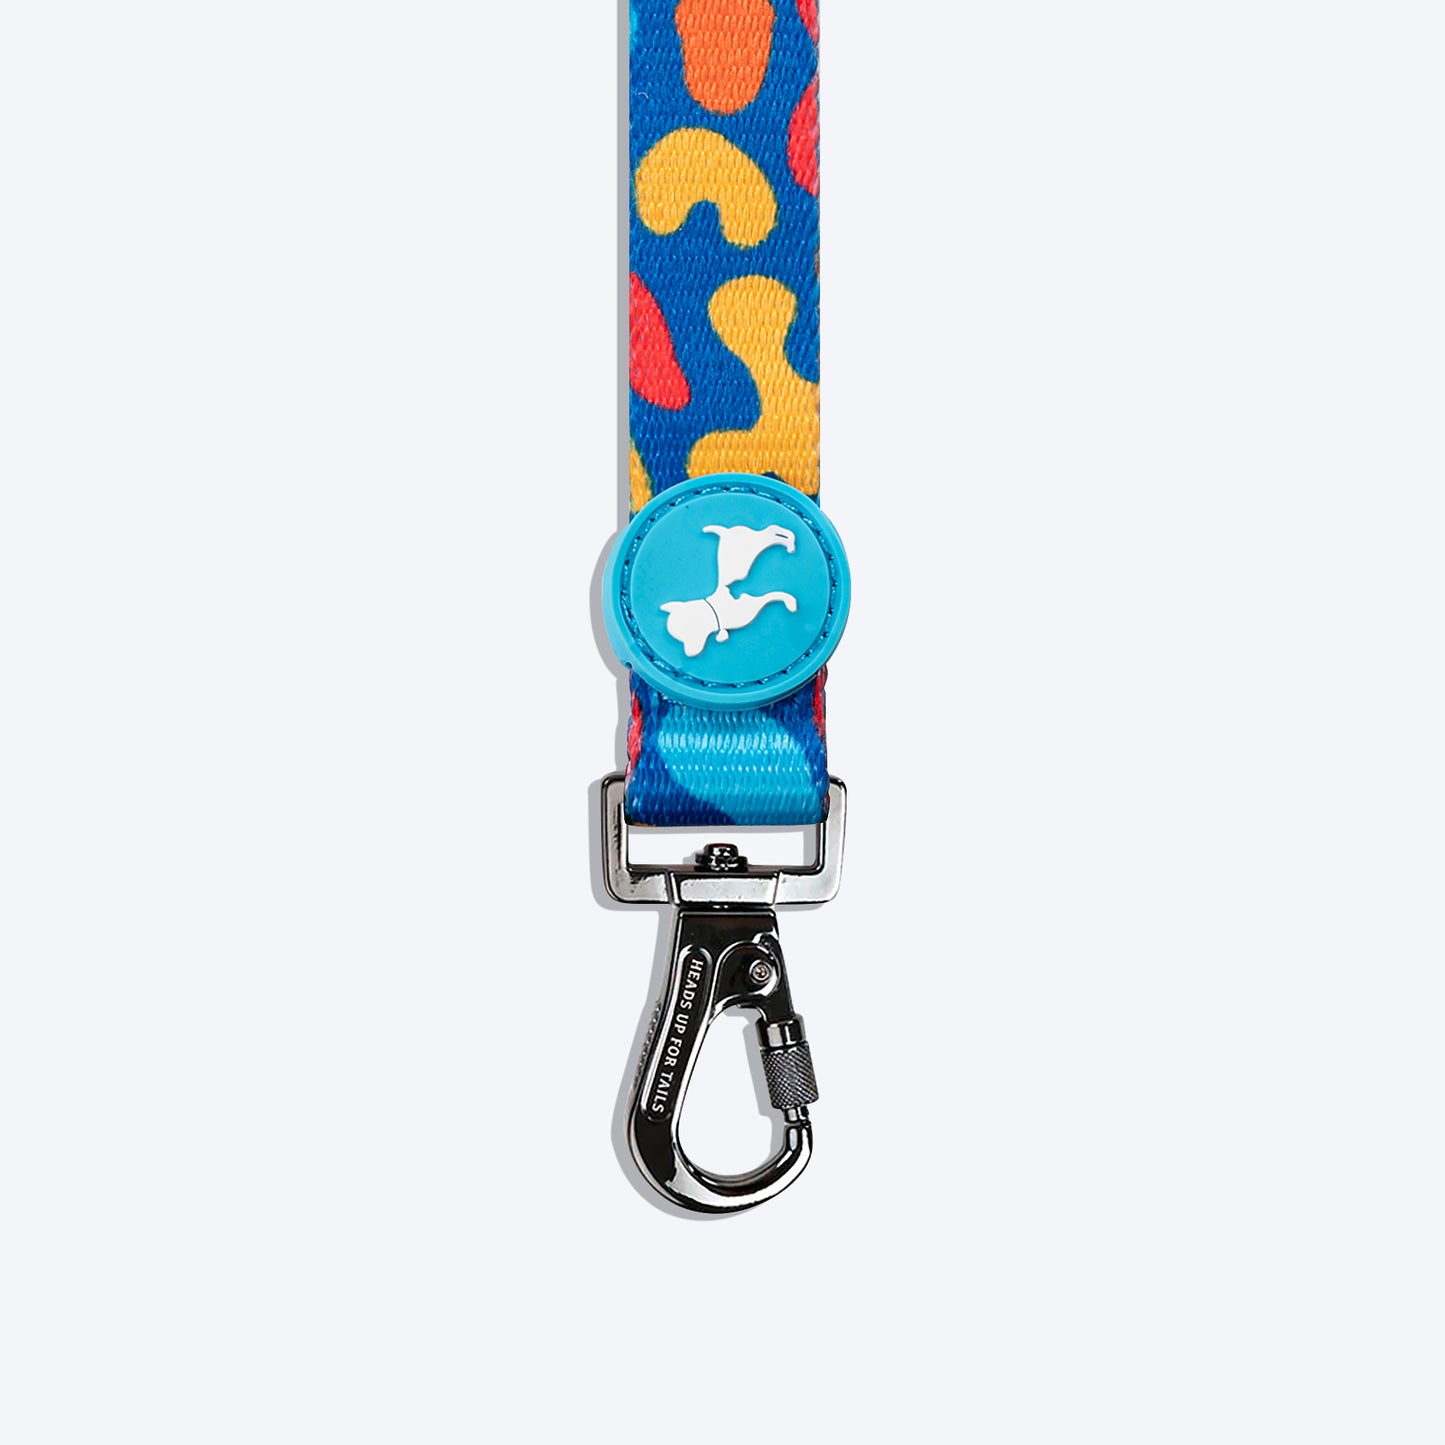 HUFT Colour Craze Printed Dog Leash - Heads Up For Tails